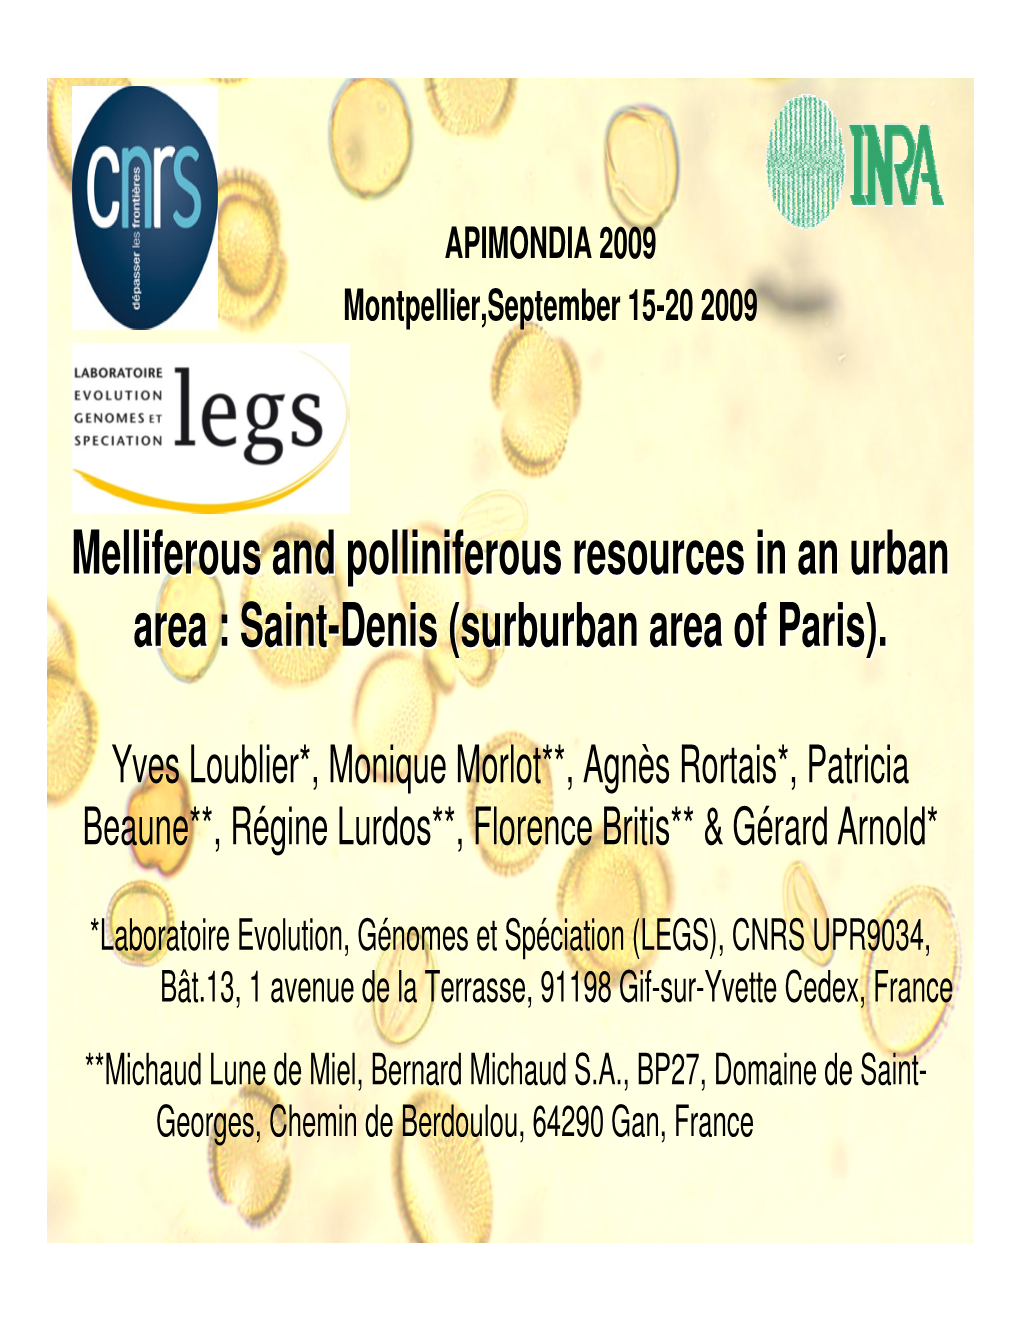 Melliferous and Polliniferous Resources in an Urban Area